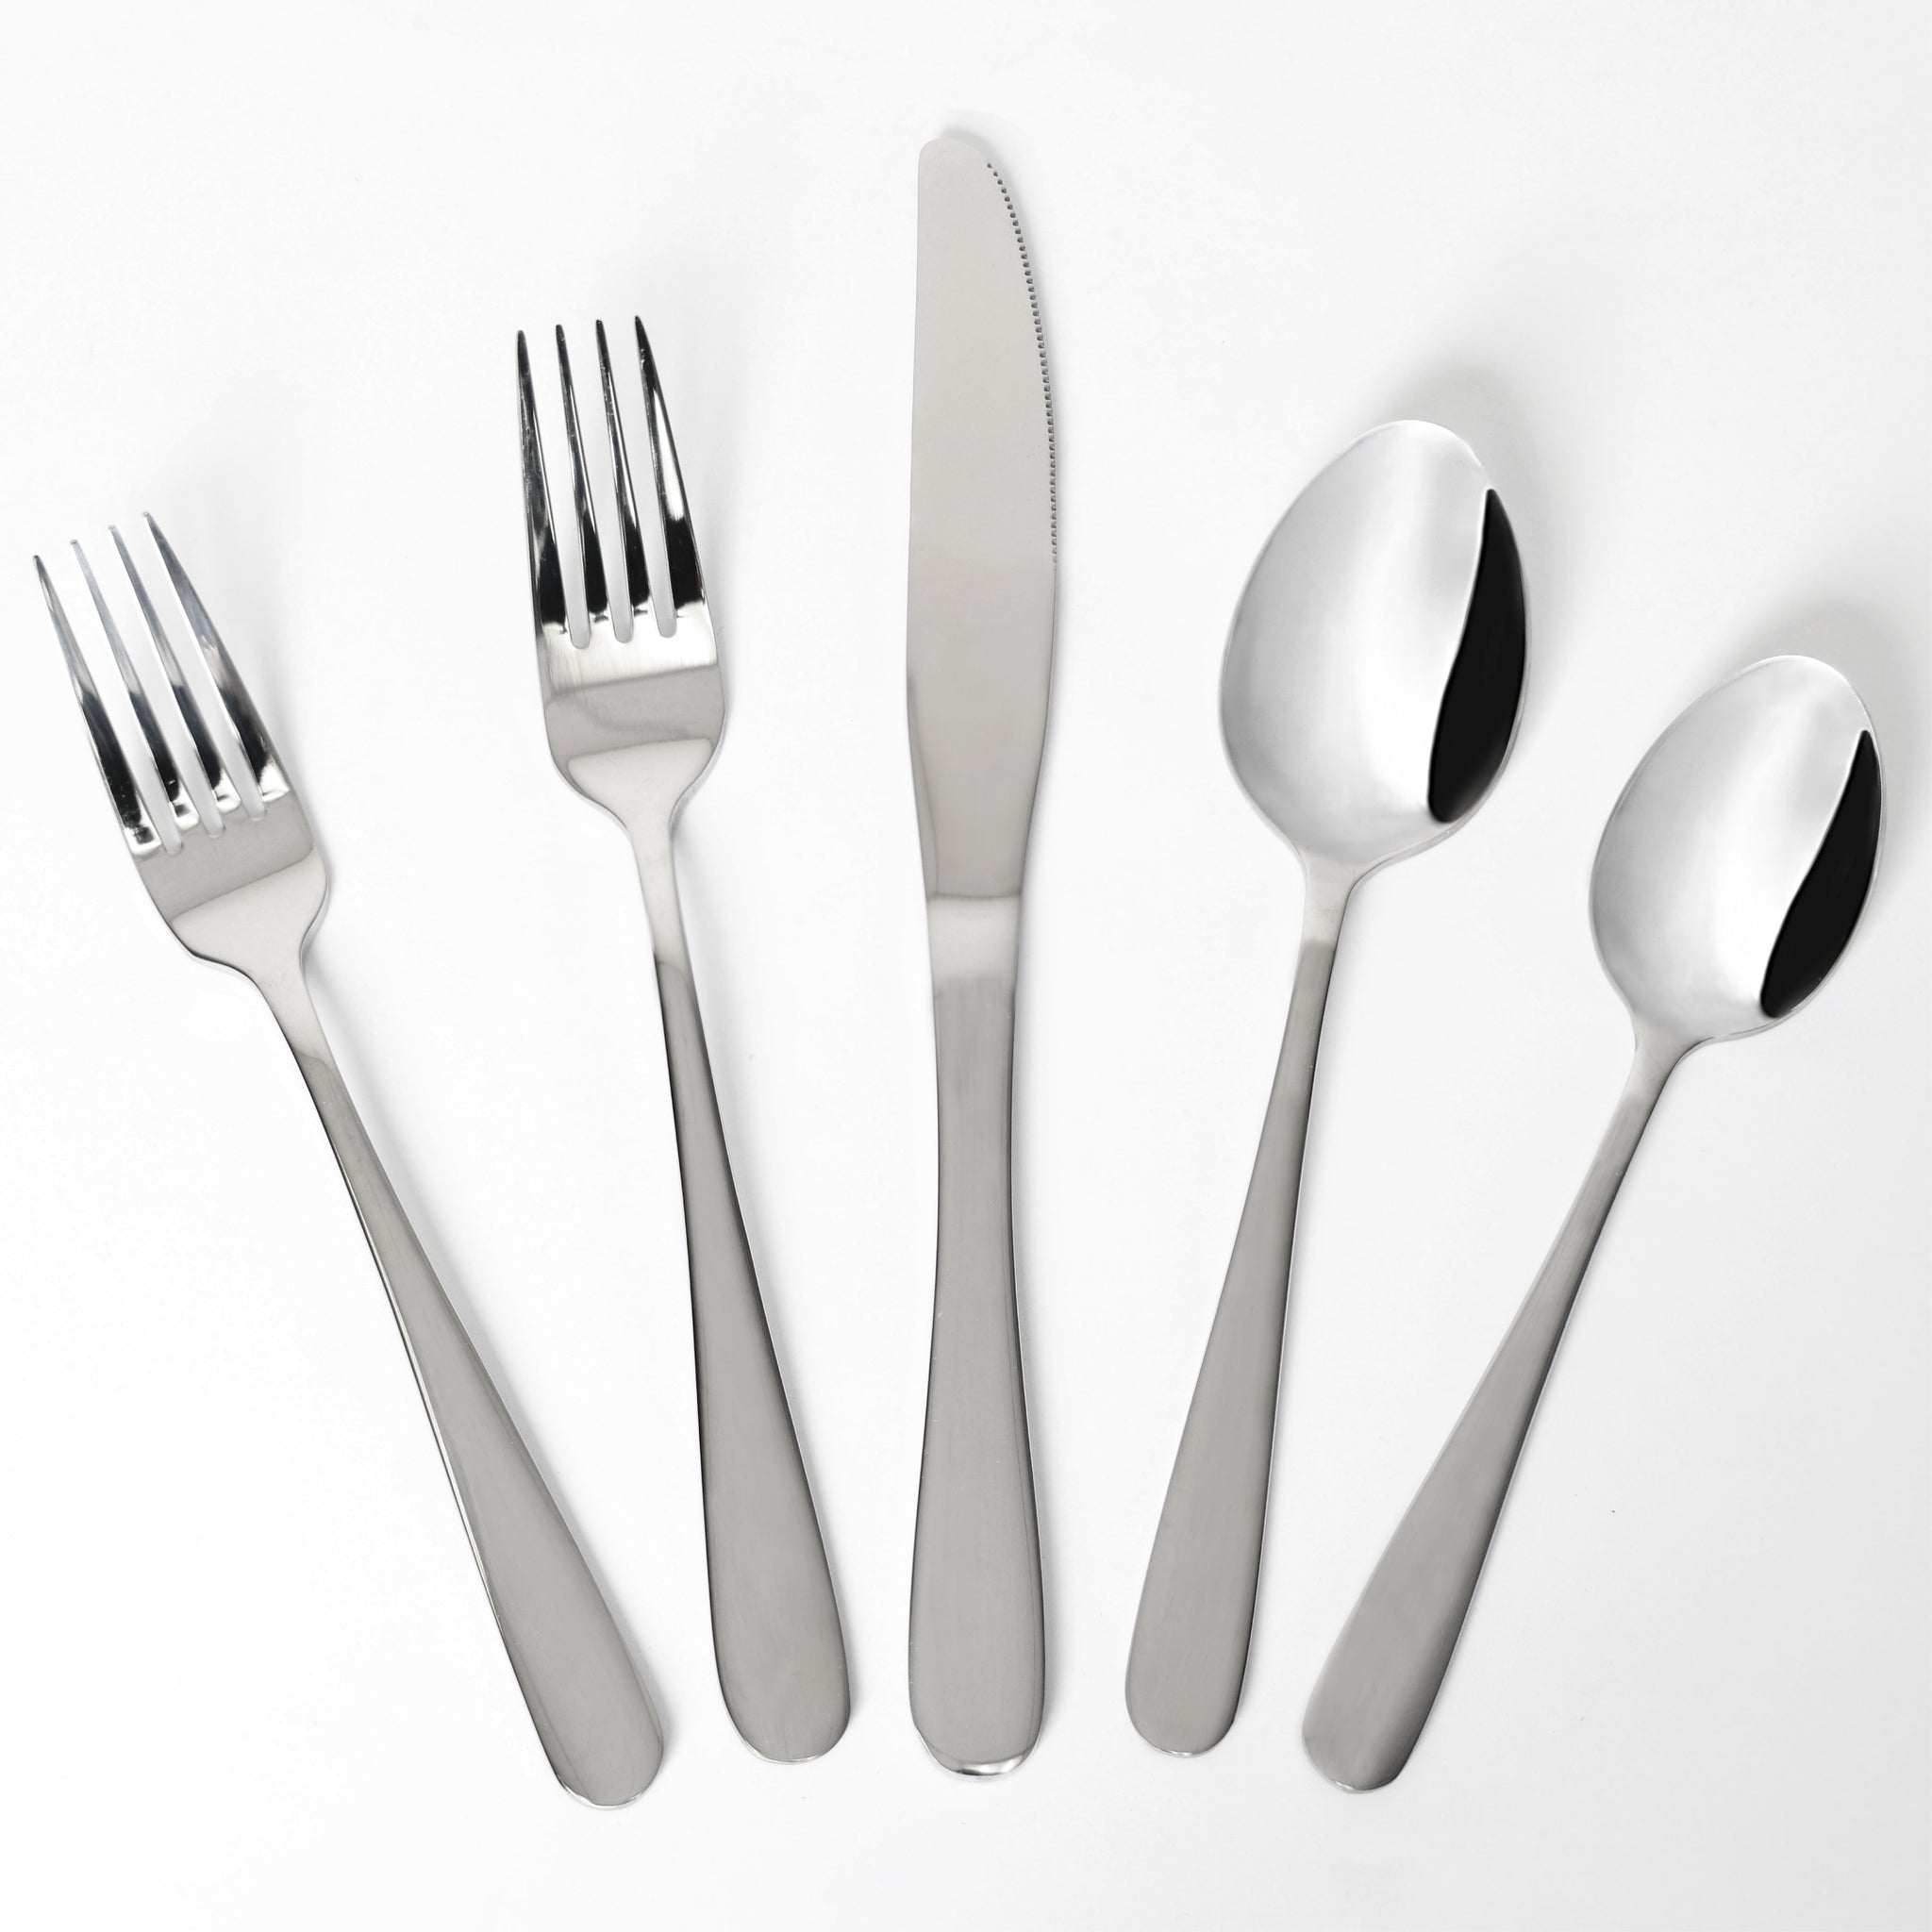 Cutlery set with fork, knife and spoon table restaurant silverware